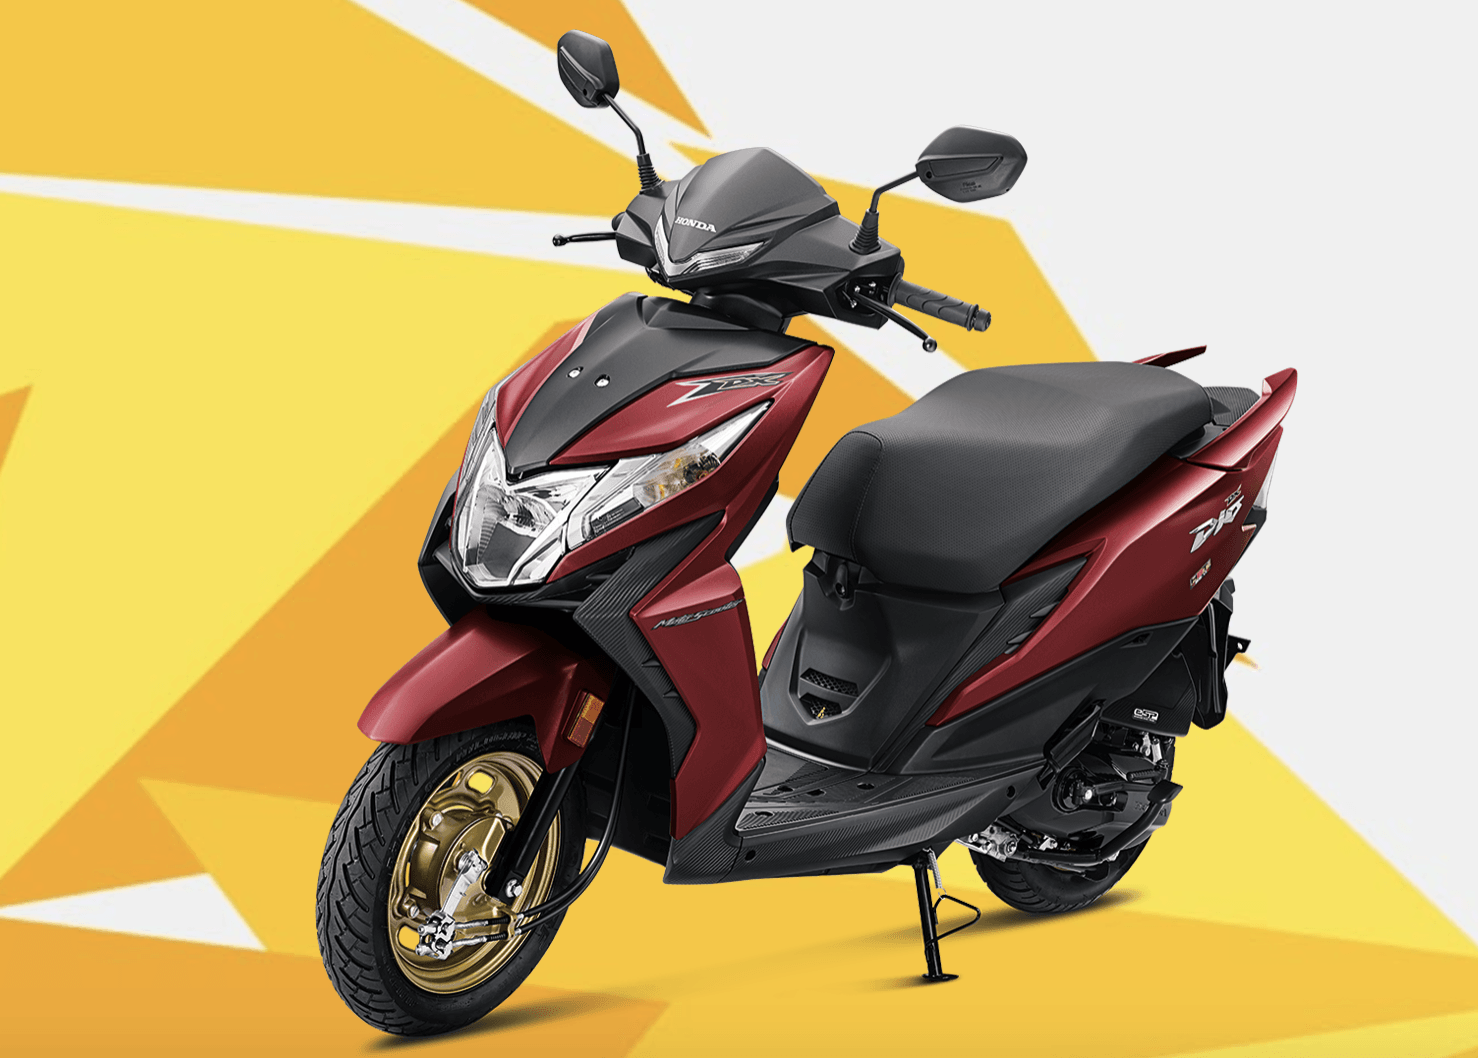 Bs6 2020 Honda Dio Launched What Are The Changes